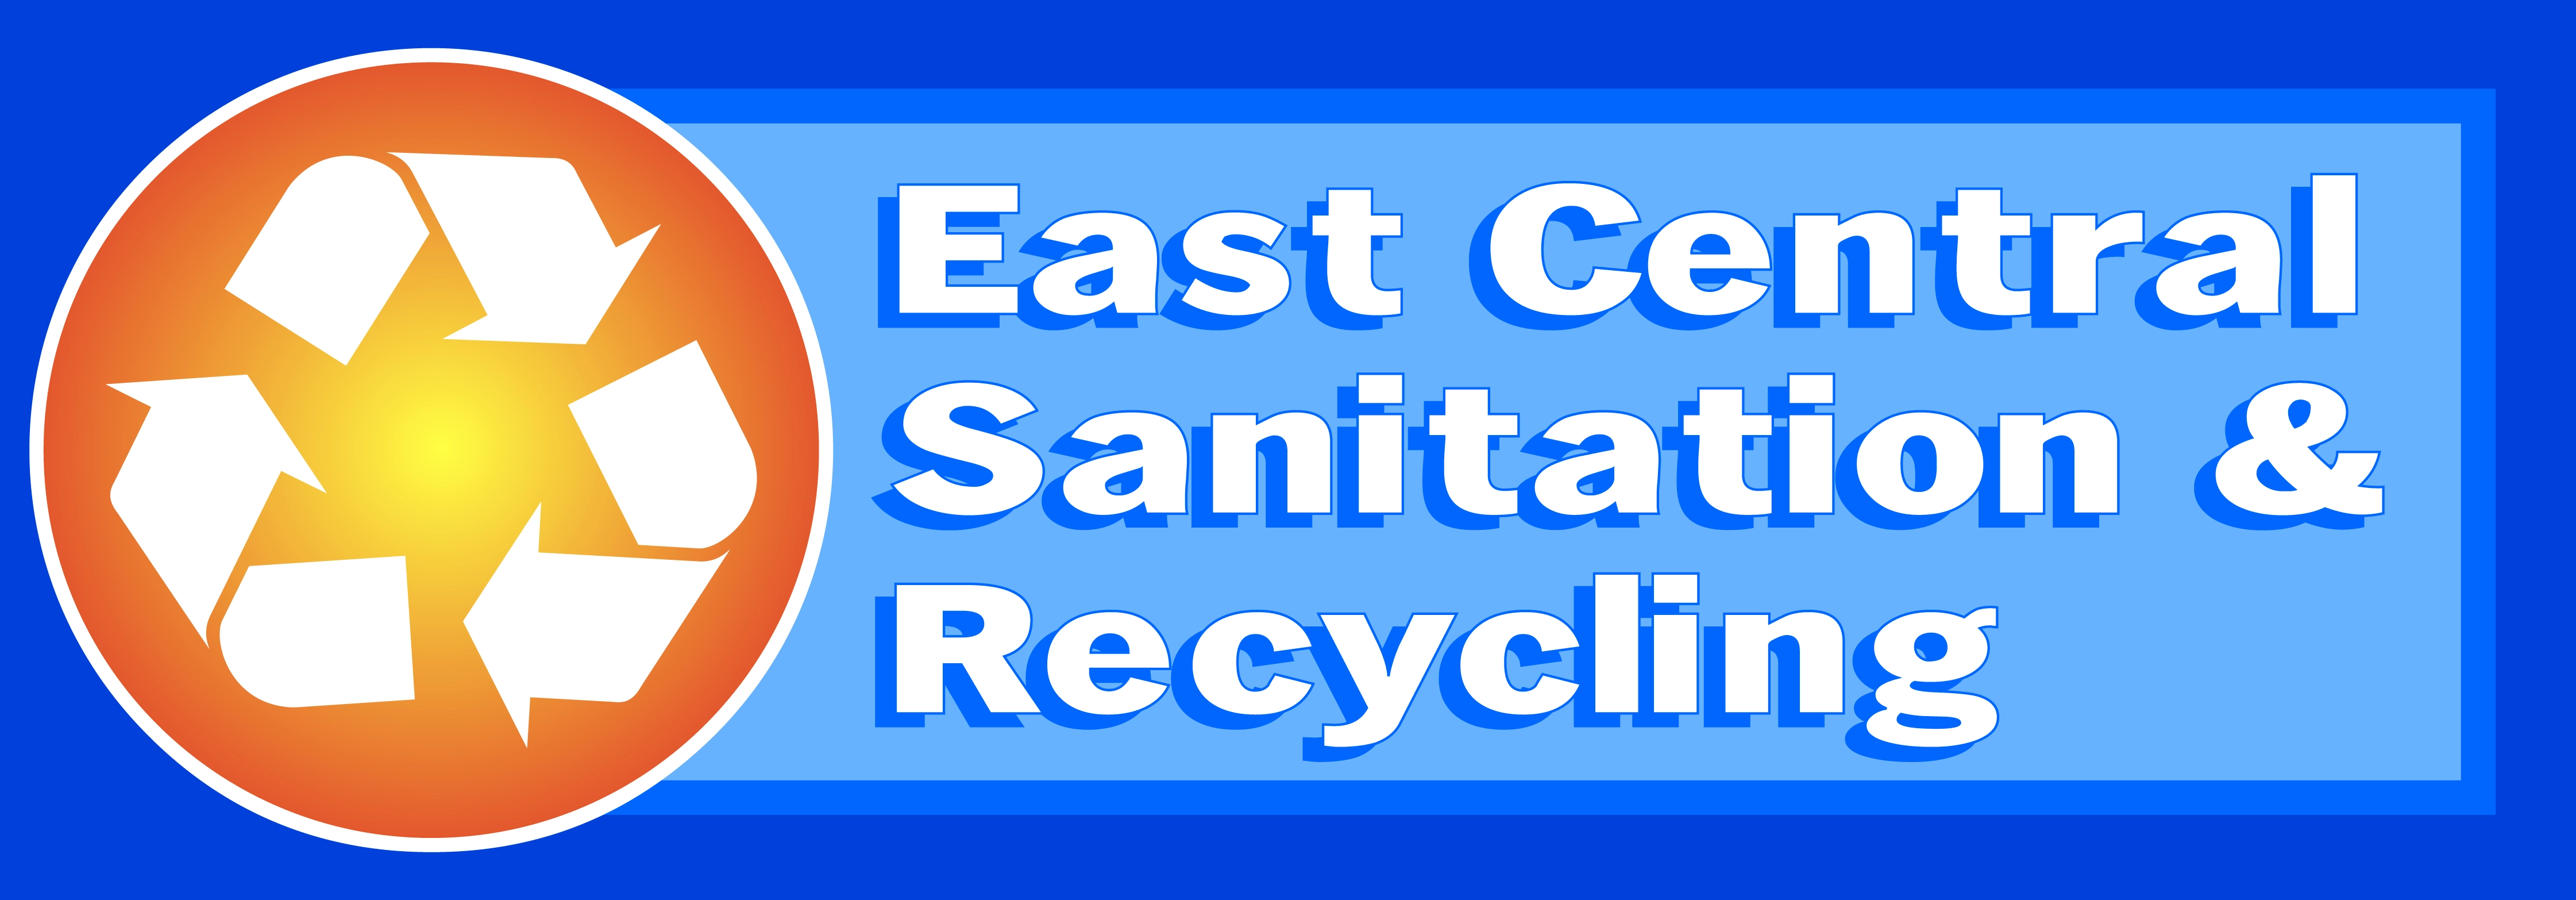 East Central Sanitation & Recycling